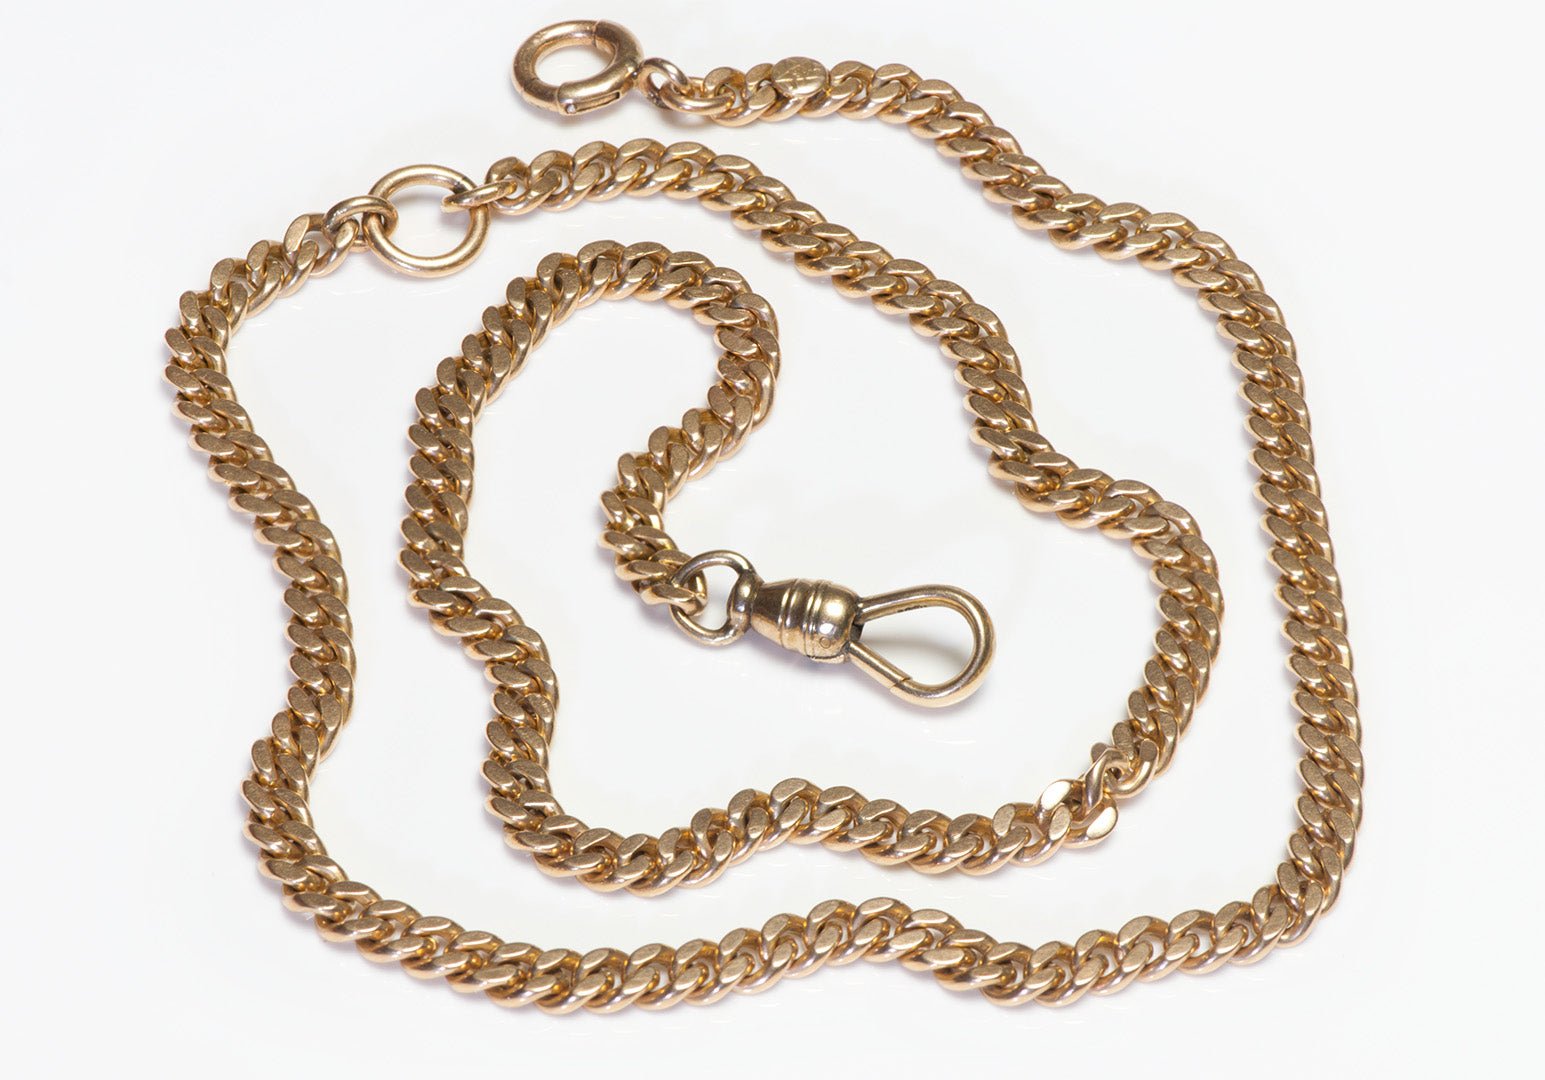 Antique Yellow Gold Pressed Link Watch Chain